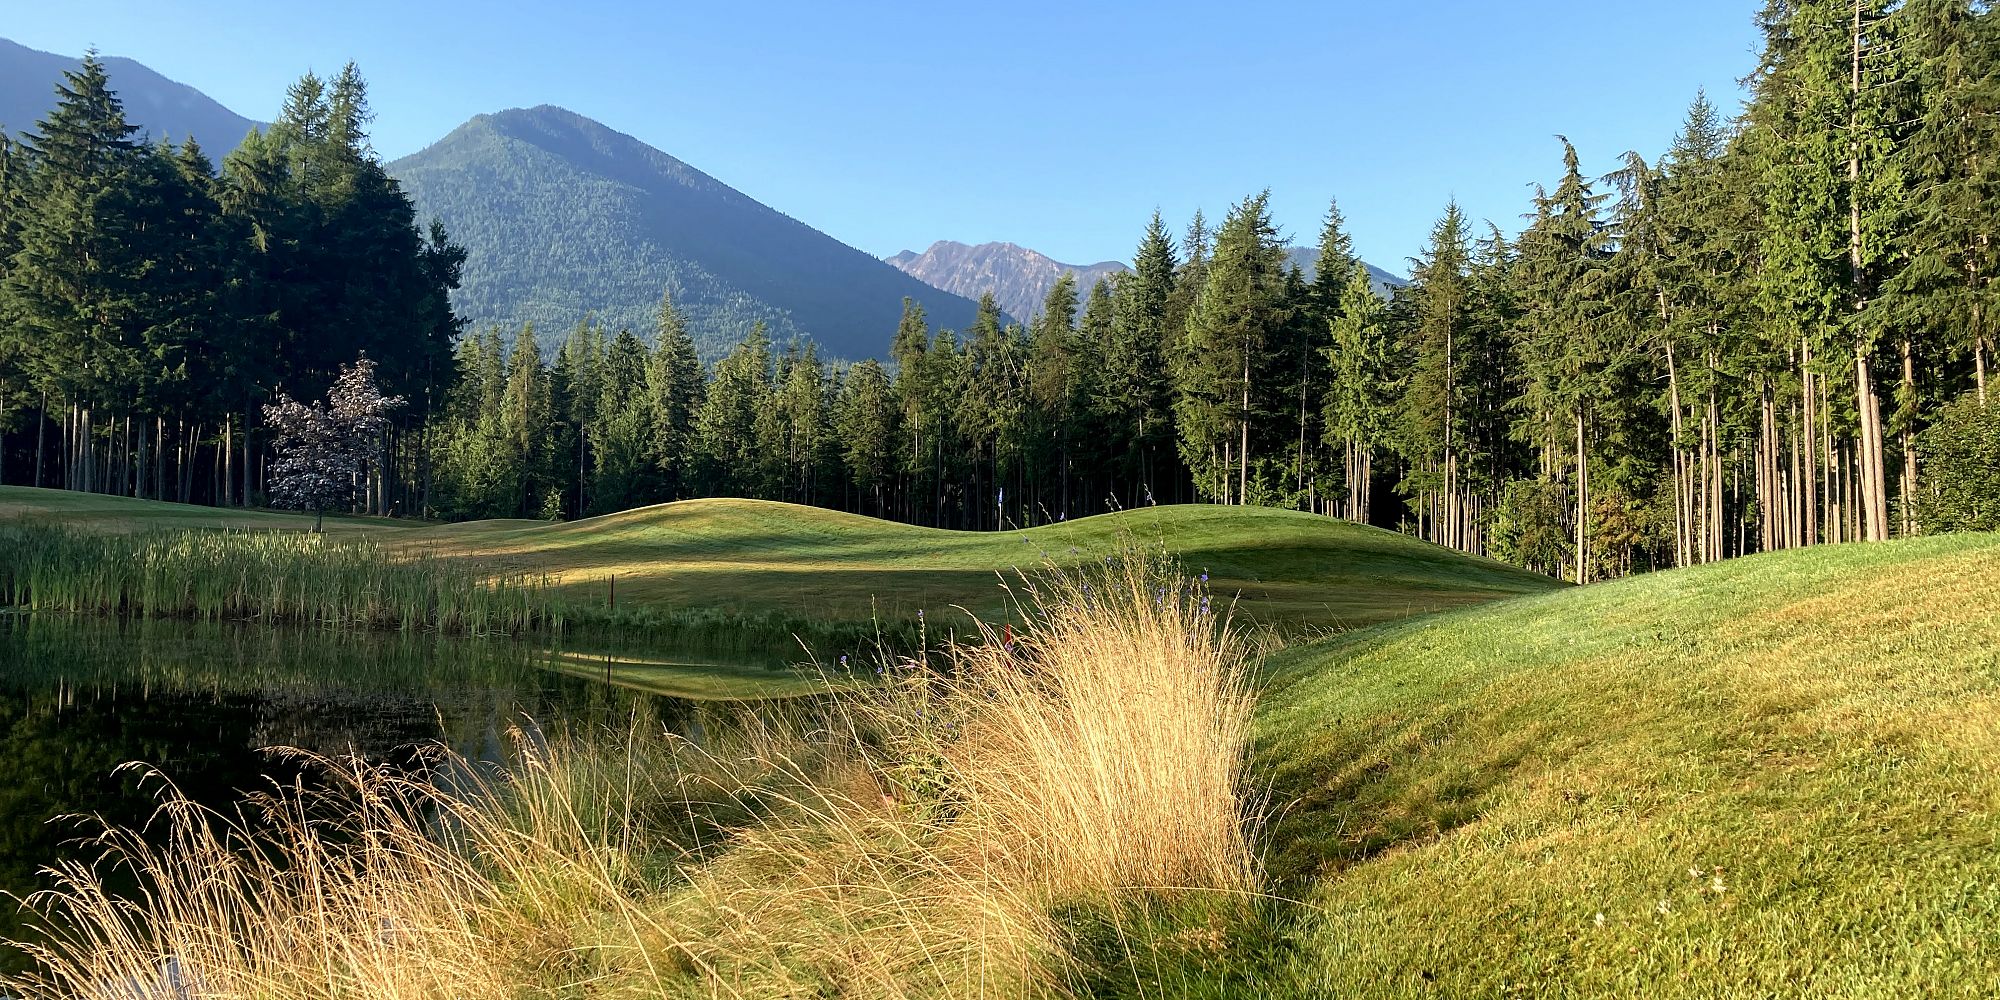 The Clear Choice for Golf in the West Kootenay Region